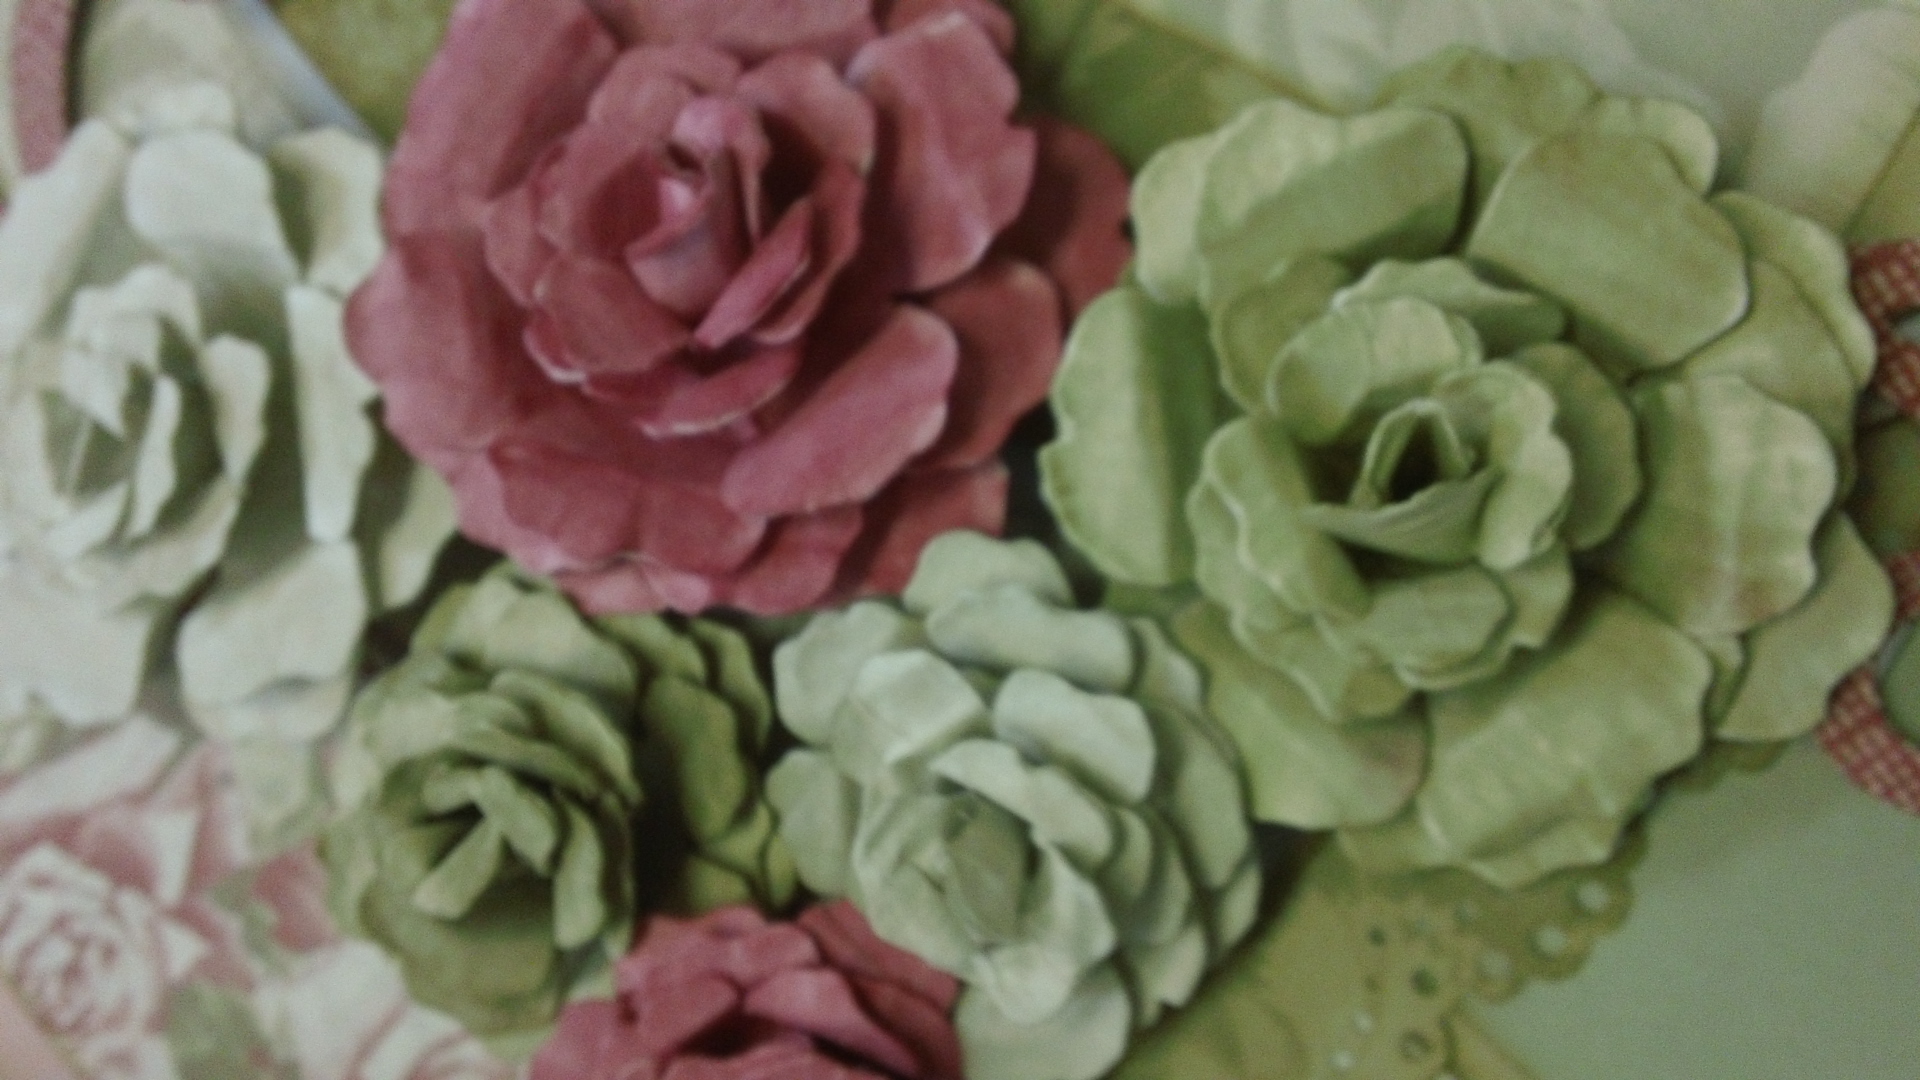 Closeup of Roses Used on Michelle Smiths Layout